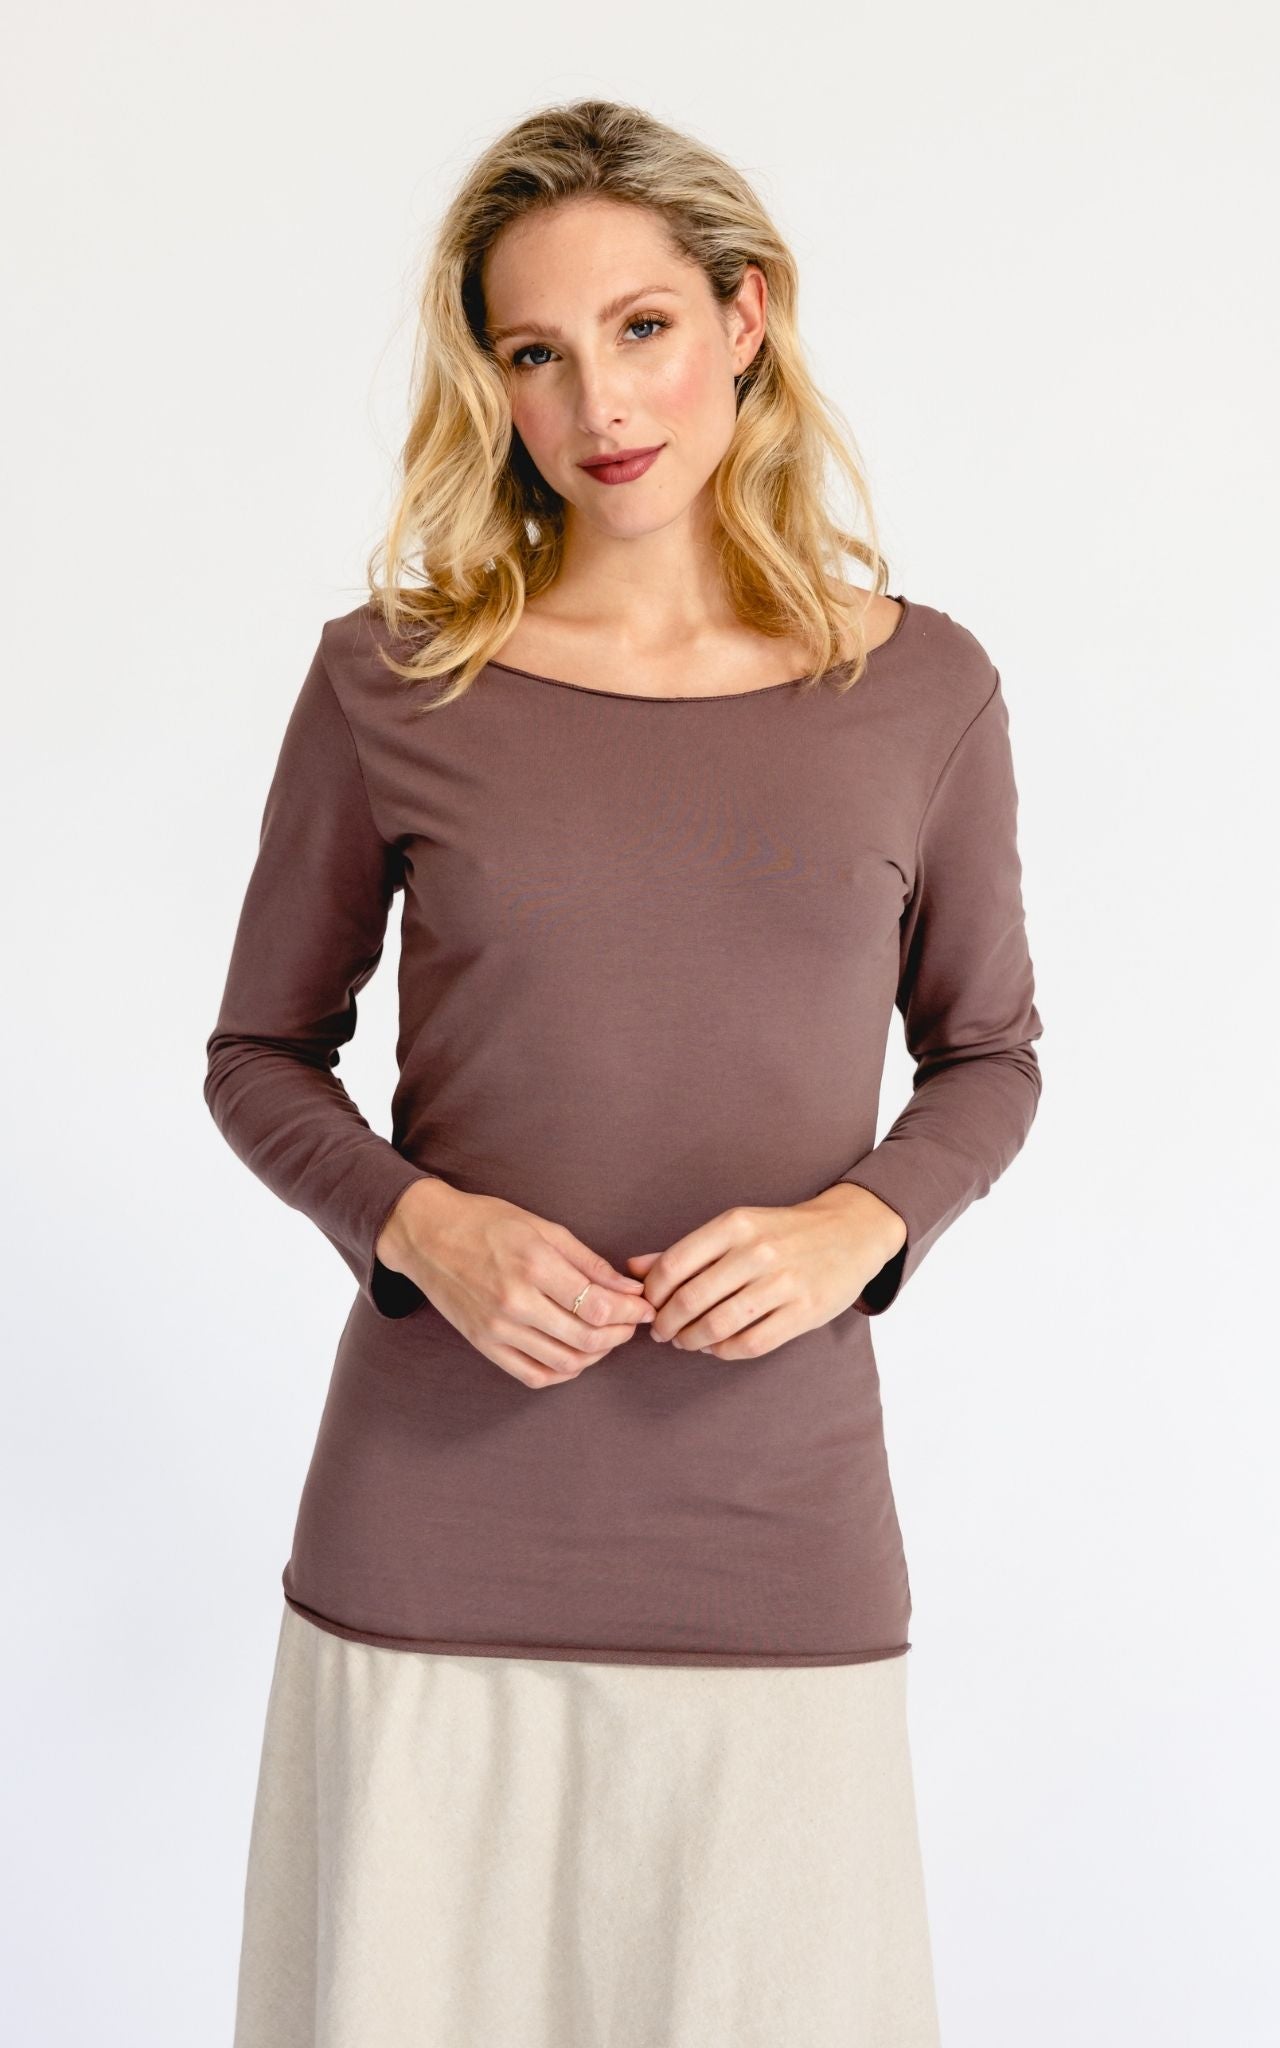 Surya Australia Ethically made Organic Cotton 'Isiola' Top made in Nepal